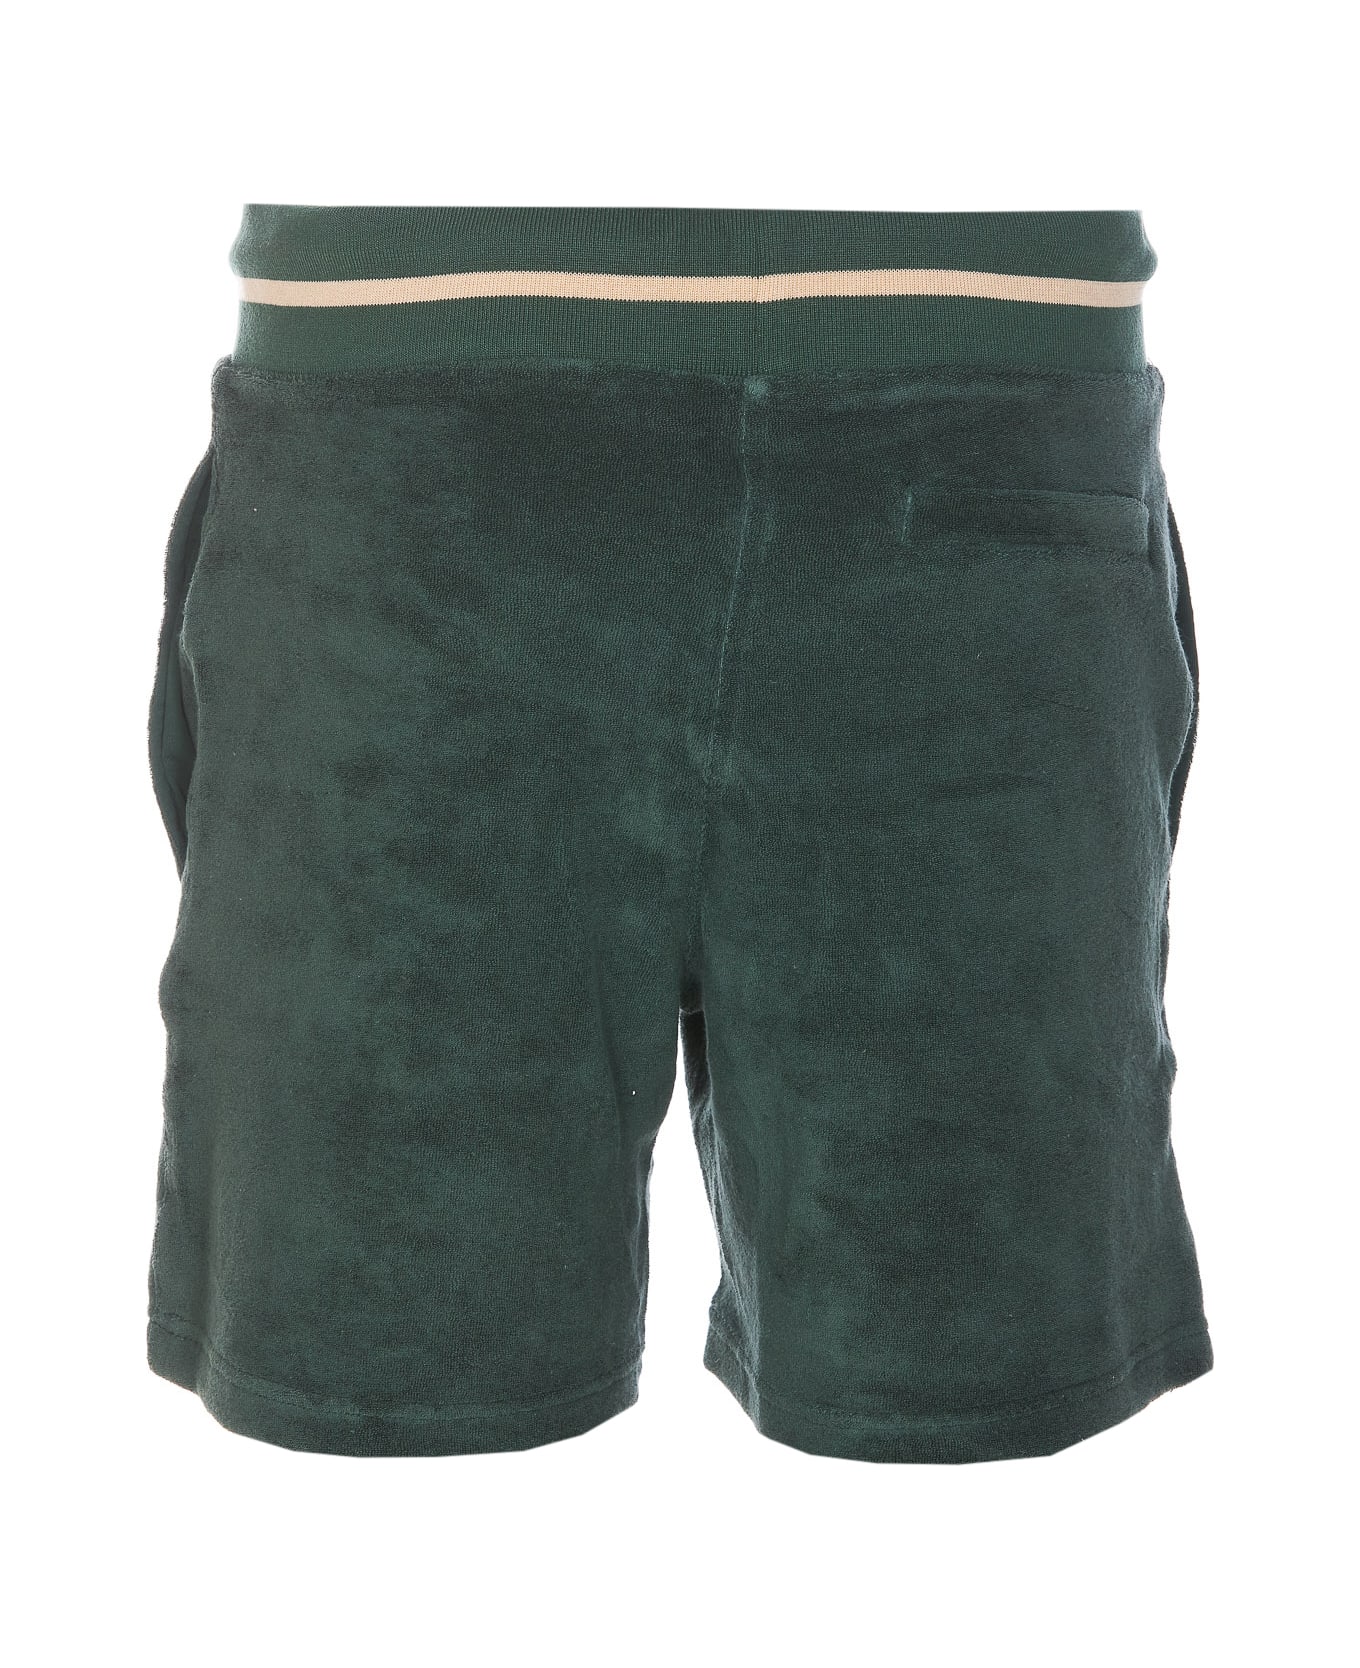 Autry Bermuda Shorts With Drawstring And Staple X Logo Detail In Jersey Man - Green